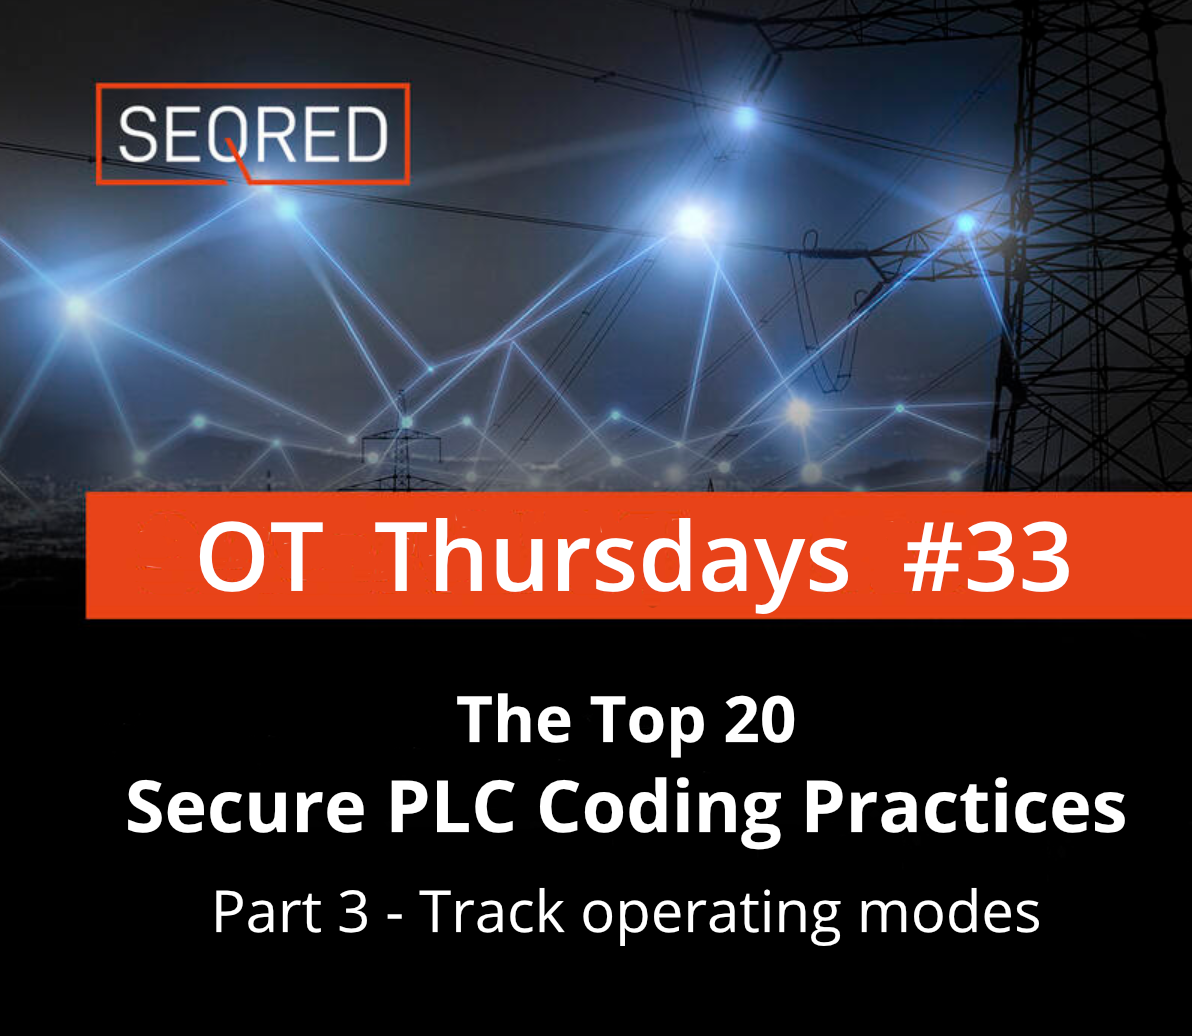 The Top 20 Secure PLC Coding Practices. Part 3 - Track operating modes